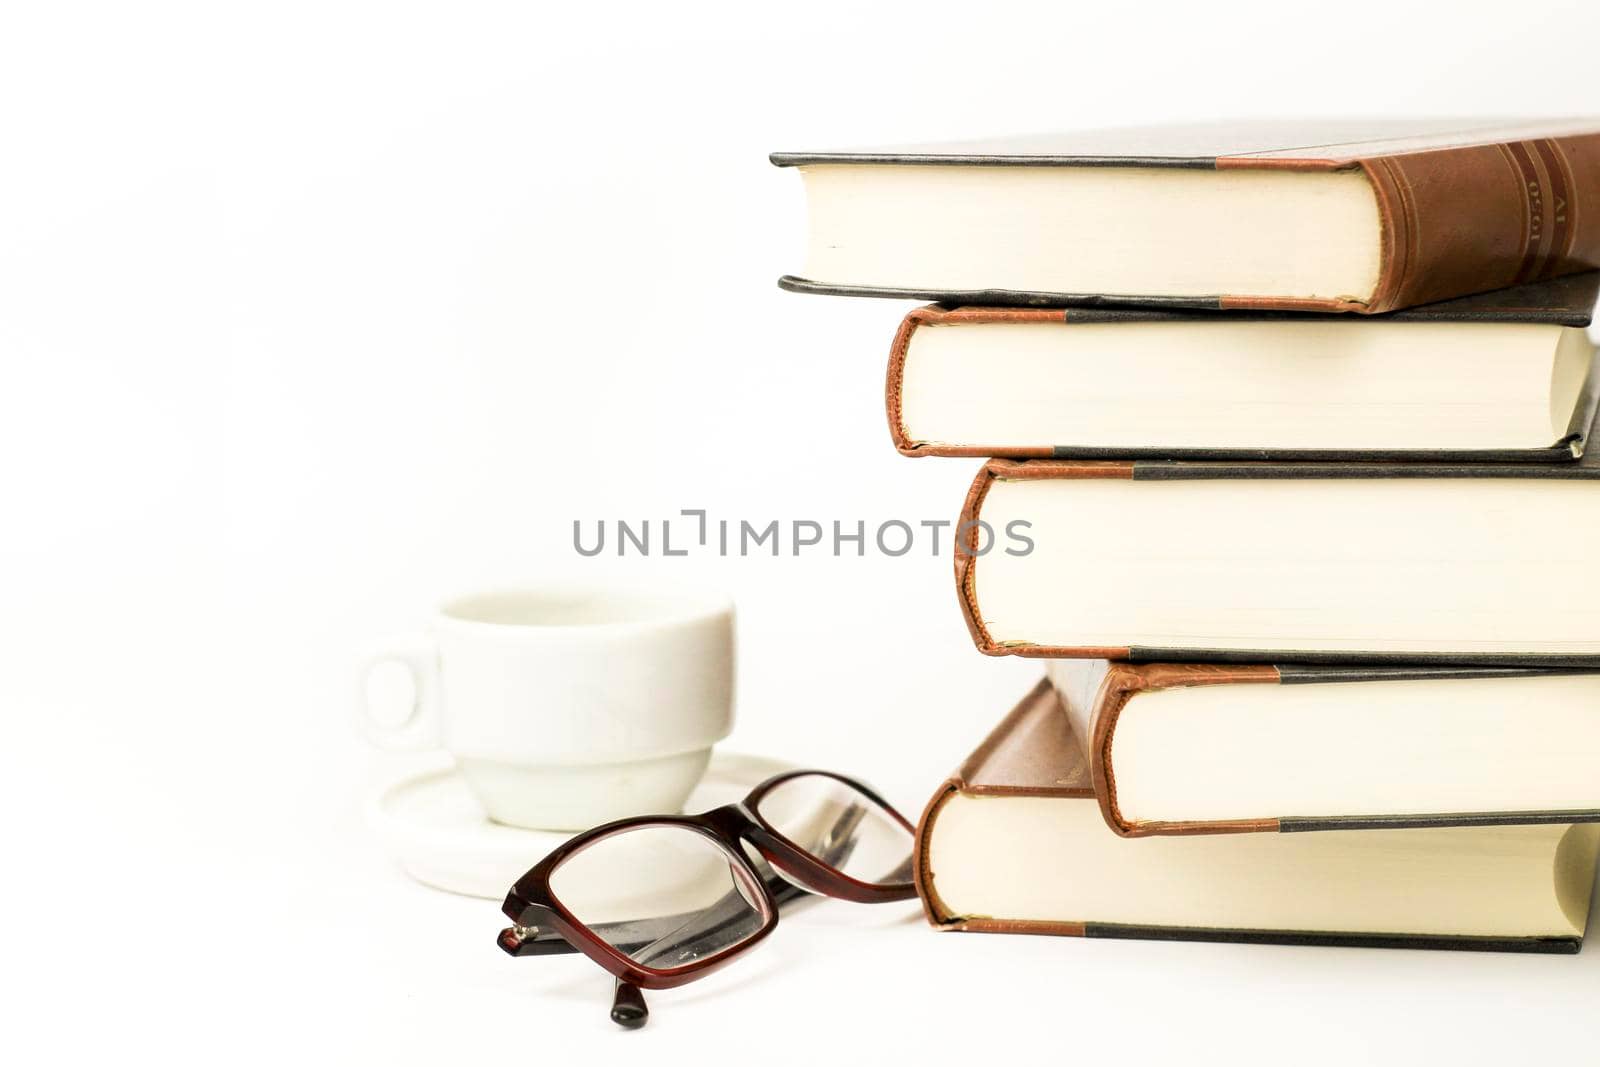 Stacked books next to cup of coffee and eyeglasses by soniabonet